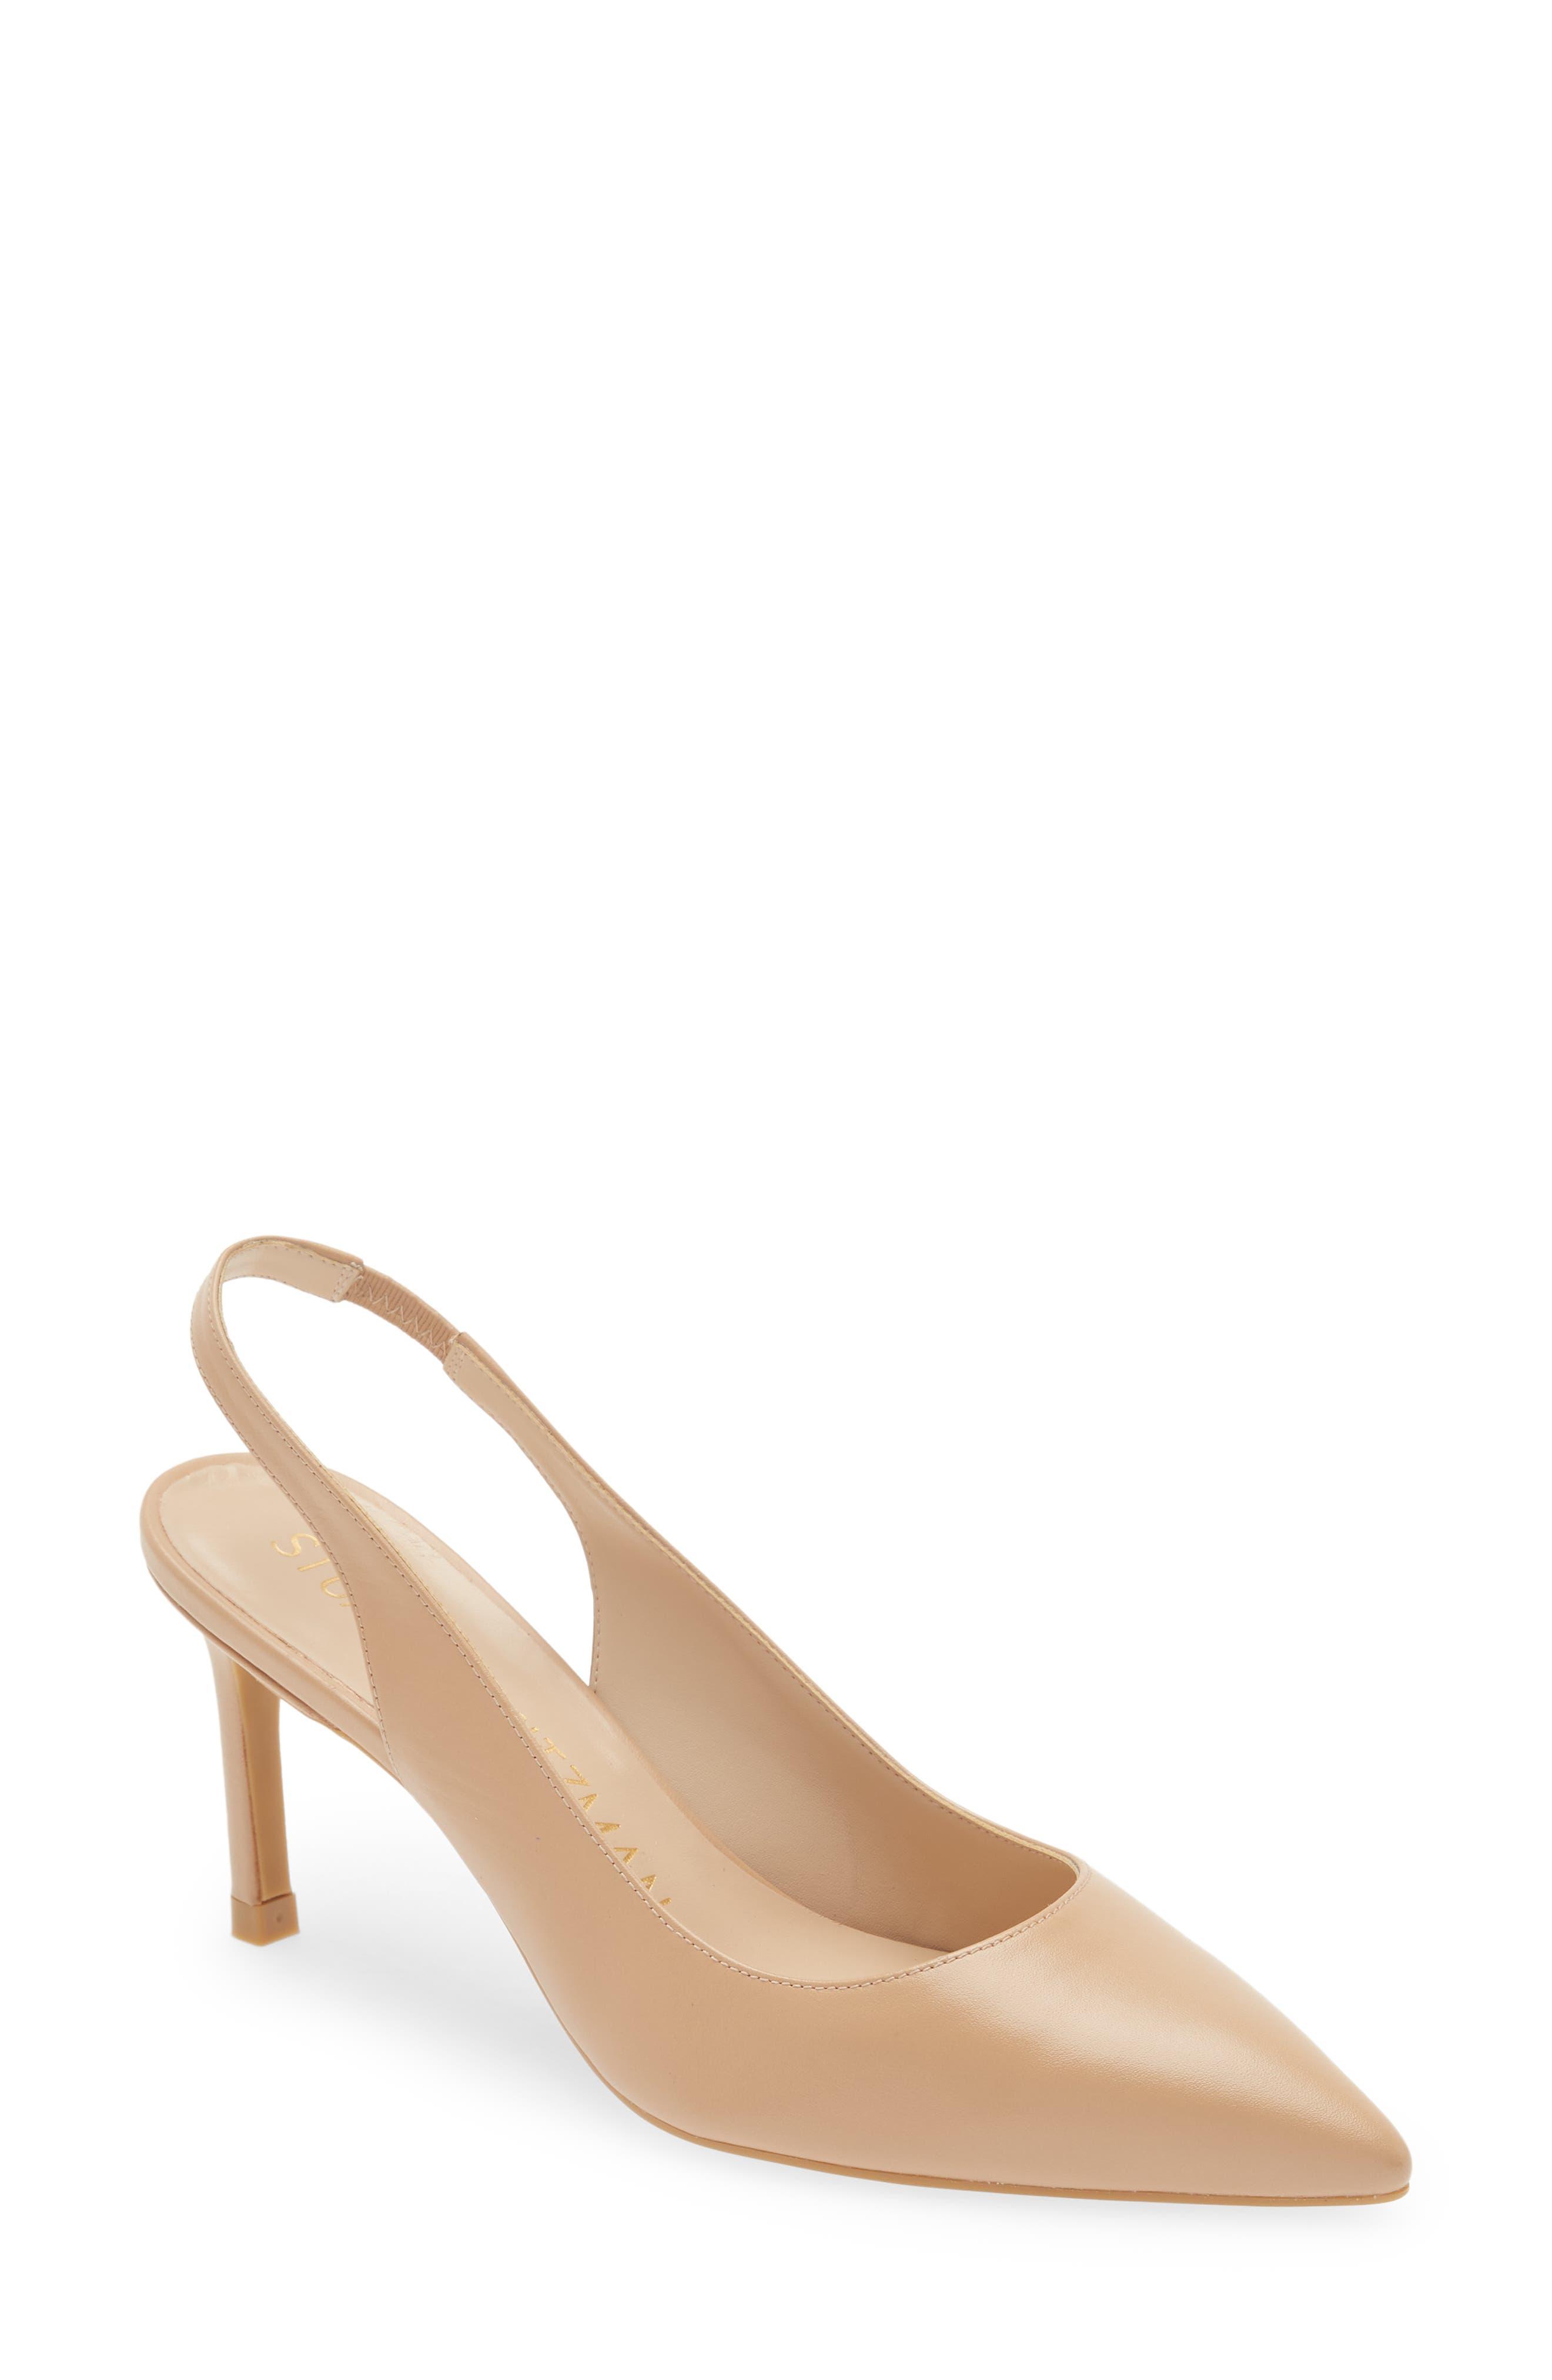 Stuart Weitzman Linsi Pointed Toe Slingback Pump in Natural | Lyst